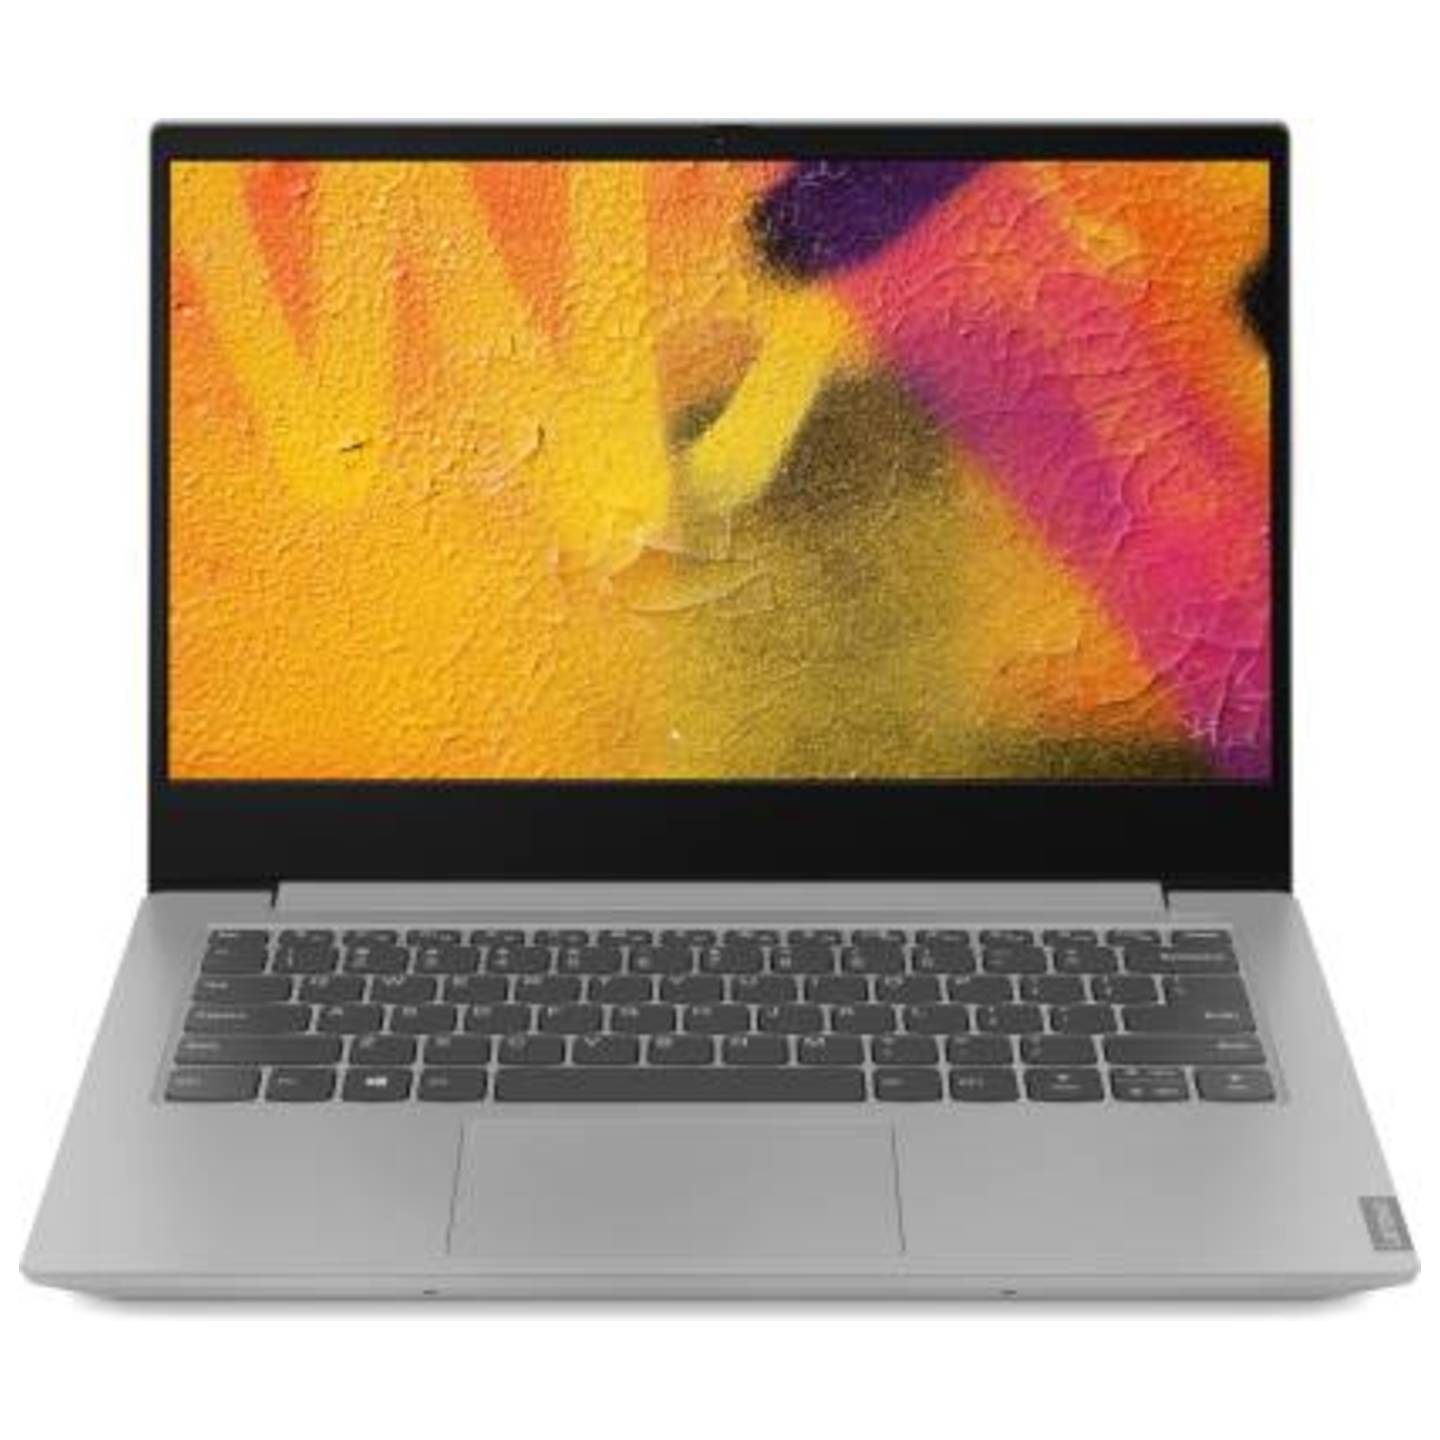 Lenovo Ideapad S340 Core i3 10th Gen - (8 GB/1 TB HDD/Windows 10 Home) S340-14IIL Thin and Light Laptop  (14 inch, Platinum Grey, 1.6 kg, With MS Office)